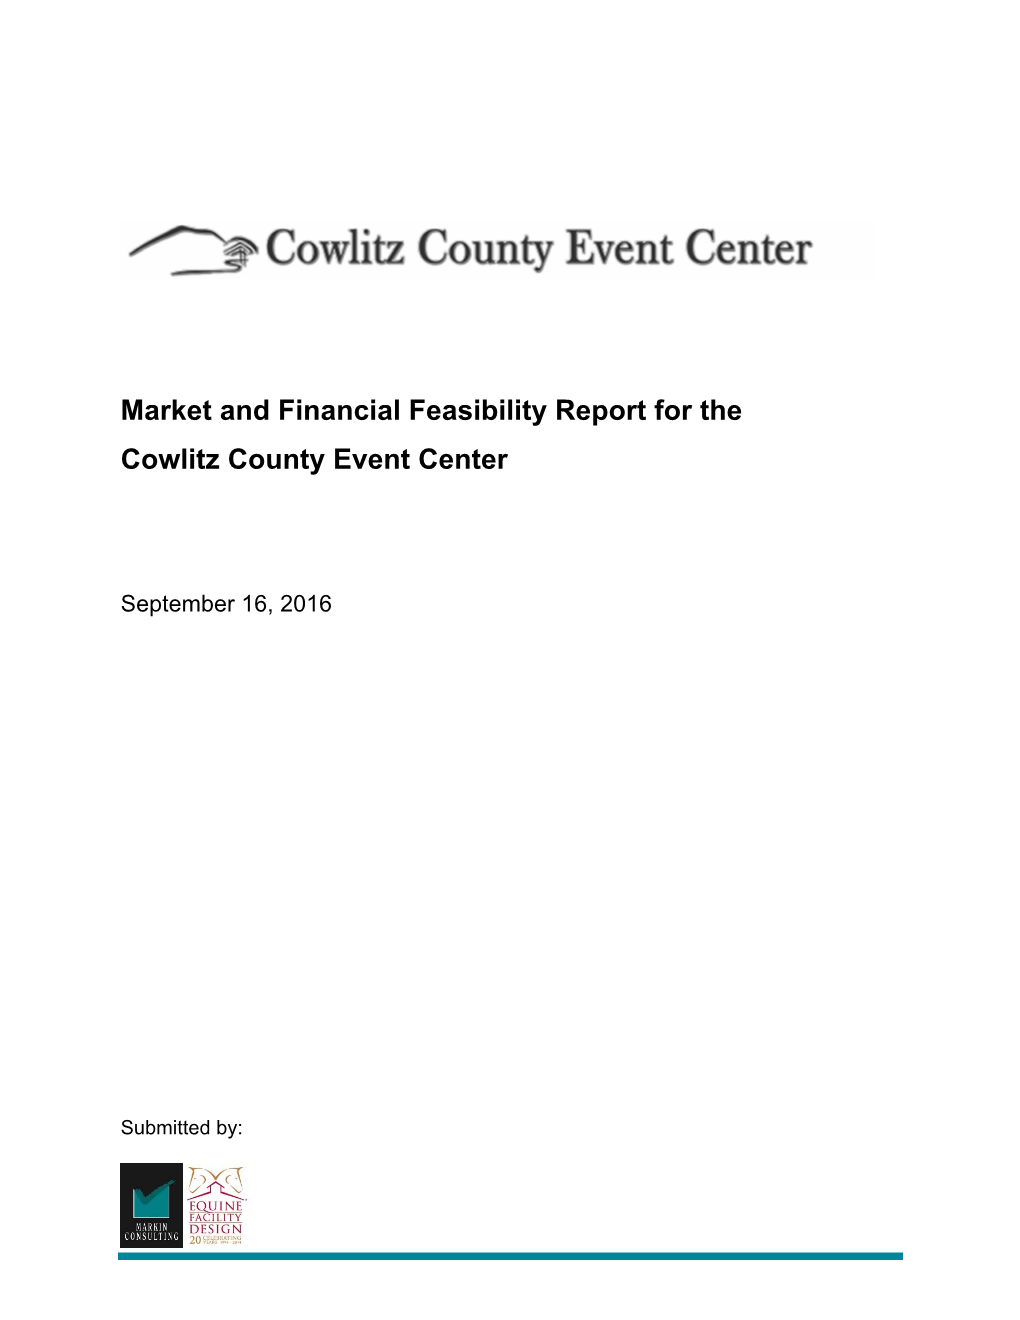 Market and Financial Feasibility Report for the Cowlitz County Event Center